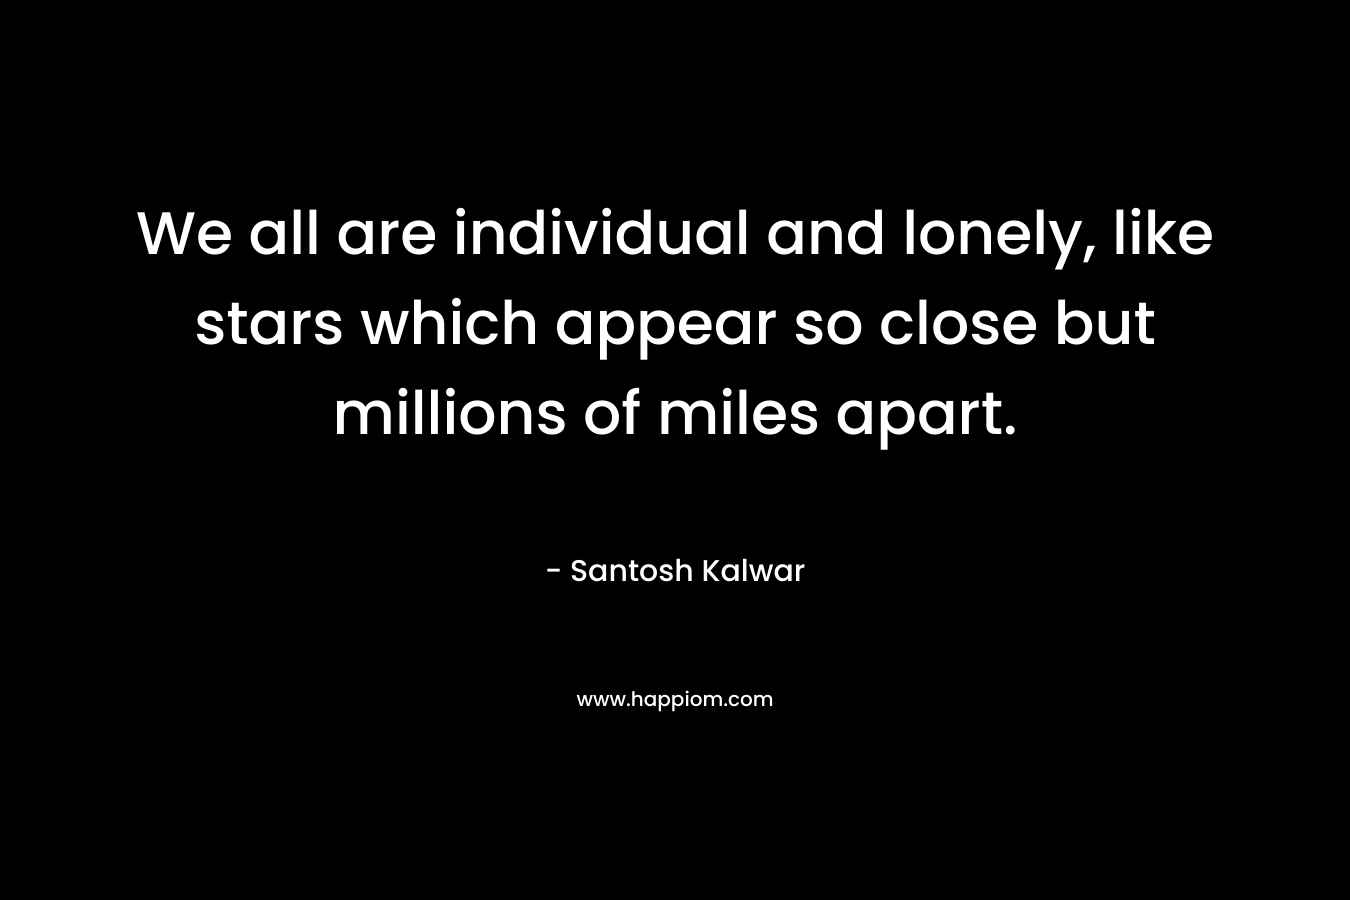 We all are individual and lonely, like stars which appear so close but millions of miles apart.